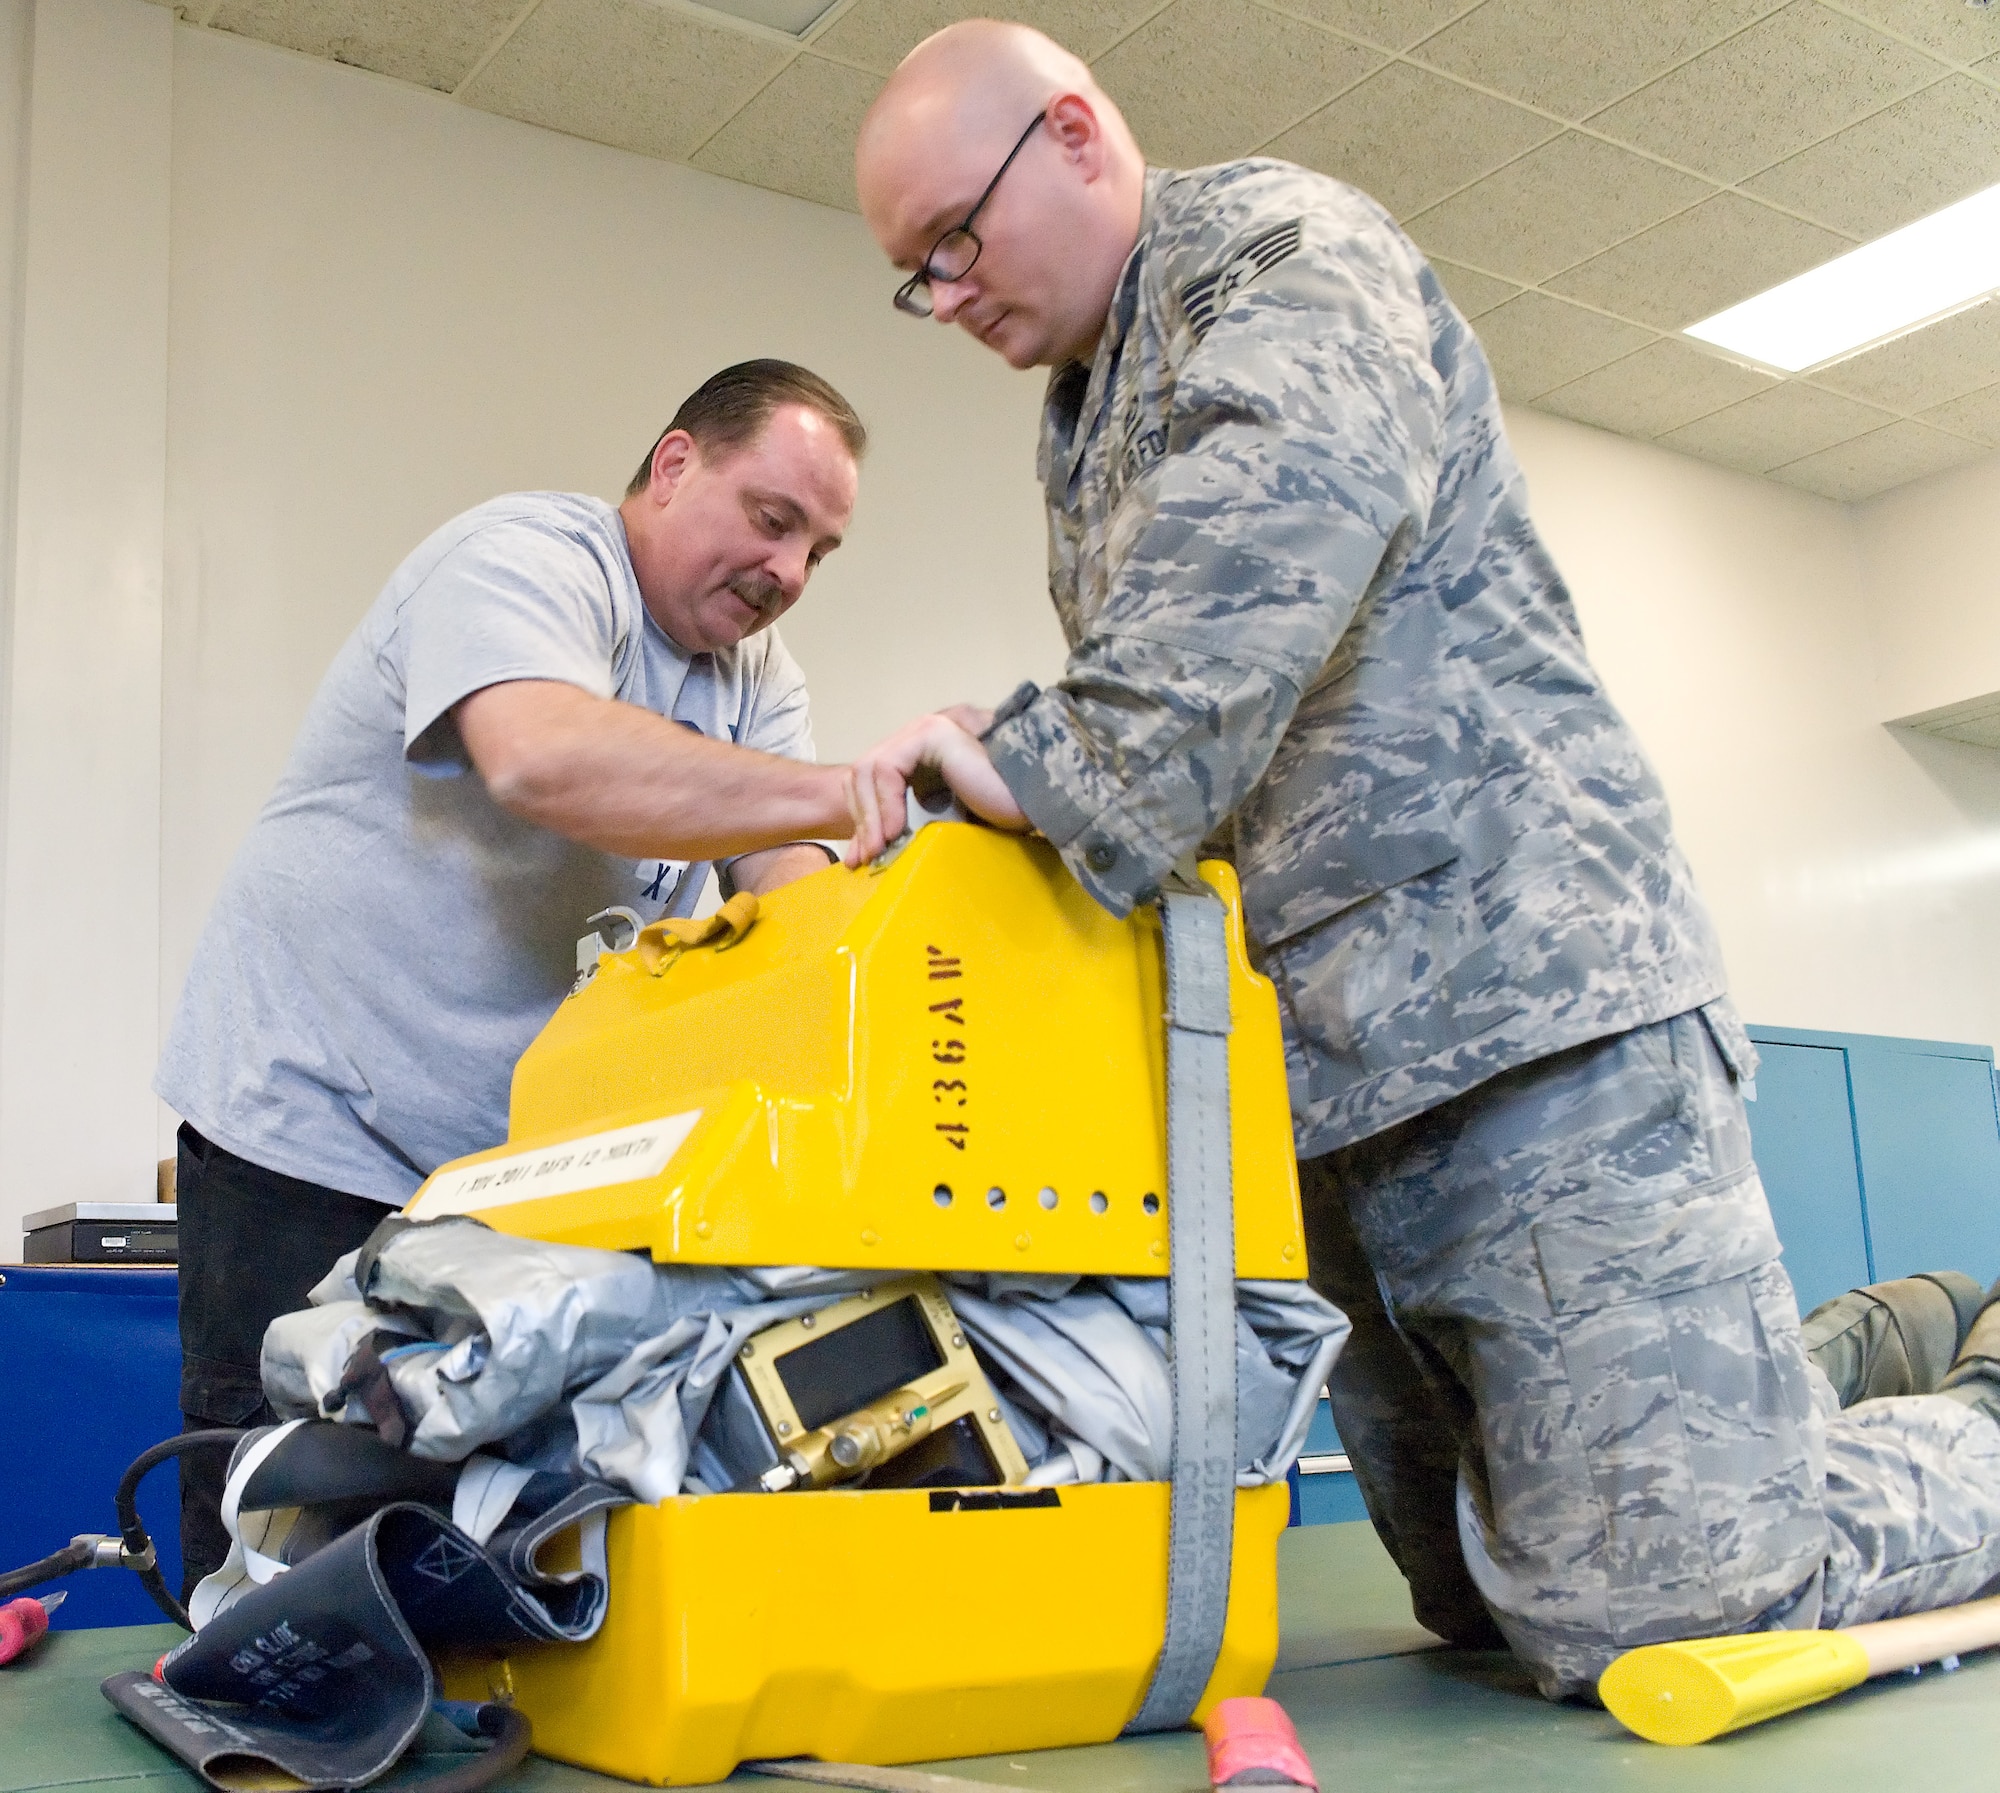 Kerry Lloyd (left), 436th Operations Support Squadron Aircrew Flight Equipment slide and raft packing specialist, and Staff Sgt. Jerry Baker, 436 OSS AFE craftsman, pack a more than 40-foot long C-5 Galaxy emergency slide into a small box July 7, 2011 at Dover Air Force Base, Del. Dover AFB has more than 70 slides, which are rotated for inspection. (U.S. Air Force photo by Roland Balik)